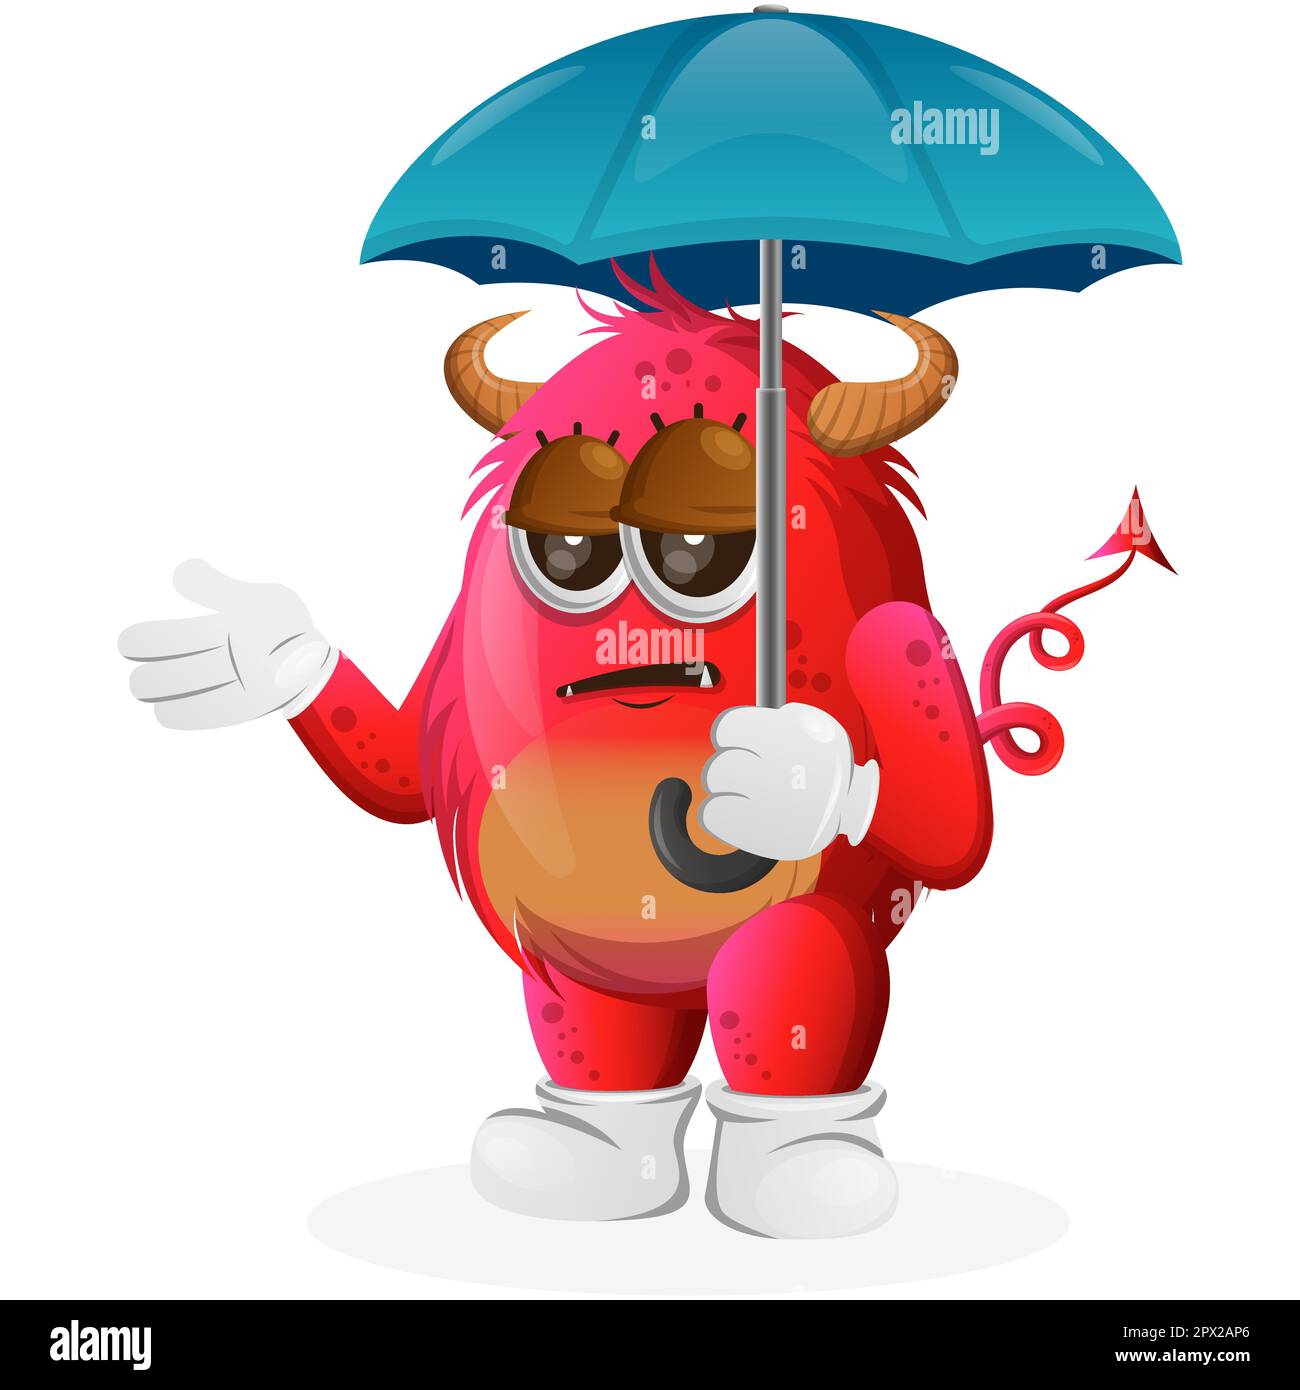 Cute red monster holding umbrella with bored expression. Perfect for kids, small business or e-Commerce, merchandise and sticker, banner promotio Stock Vector